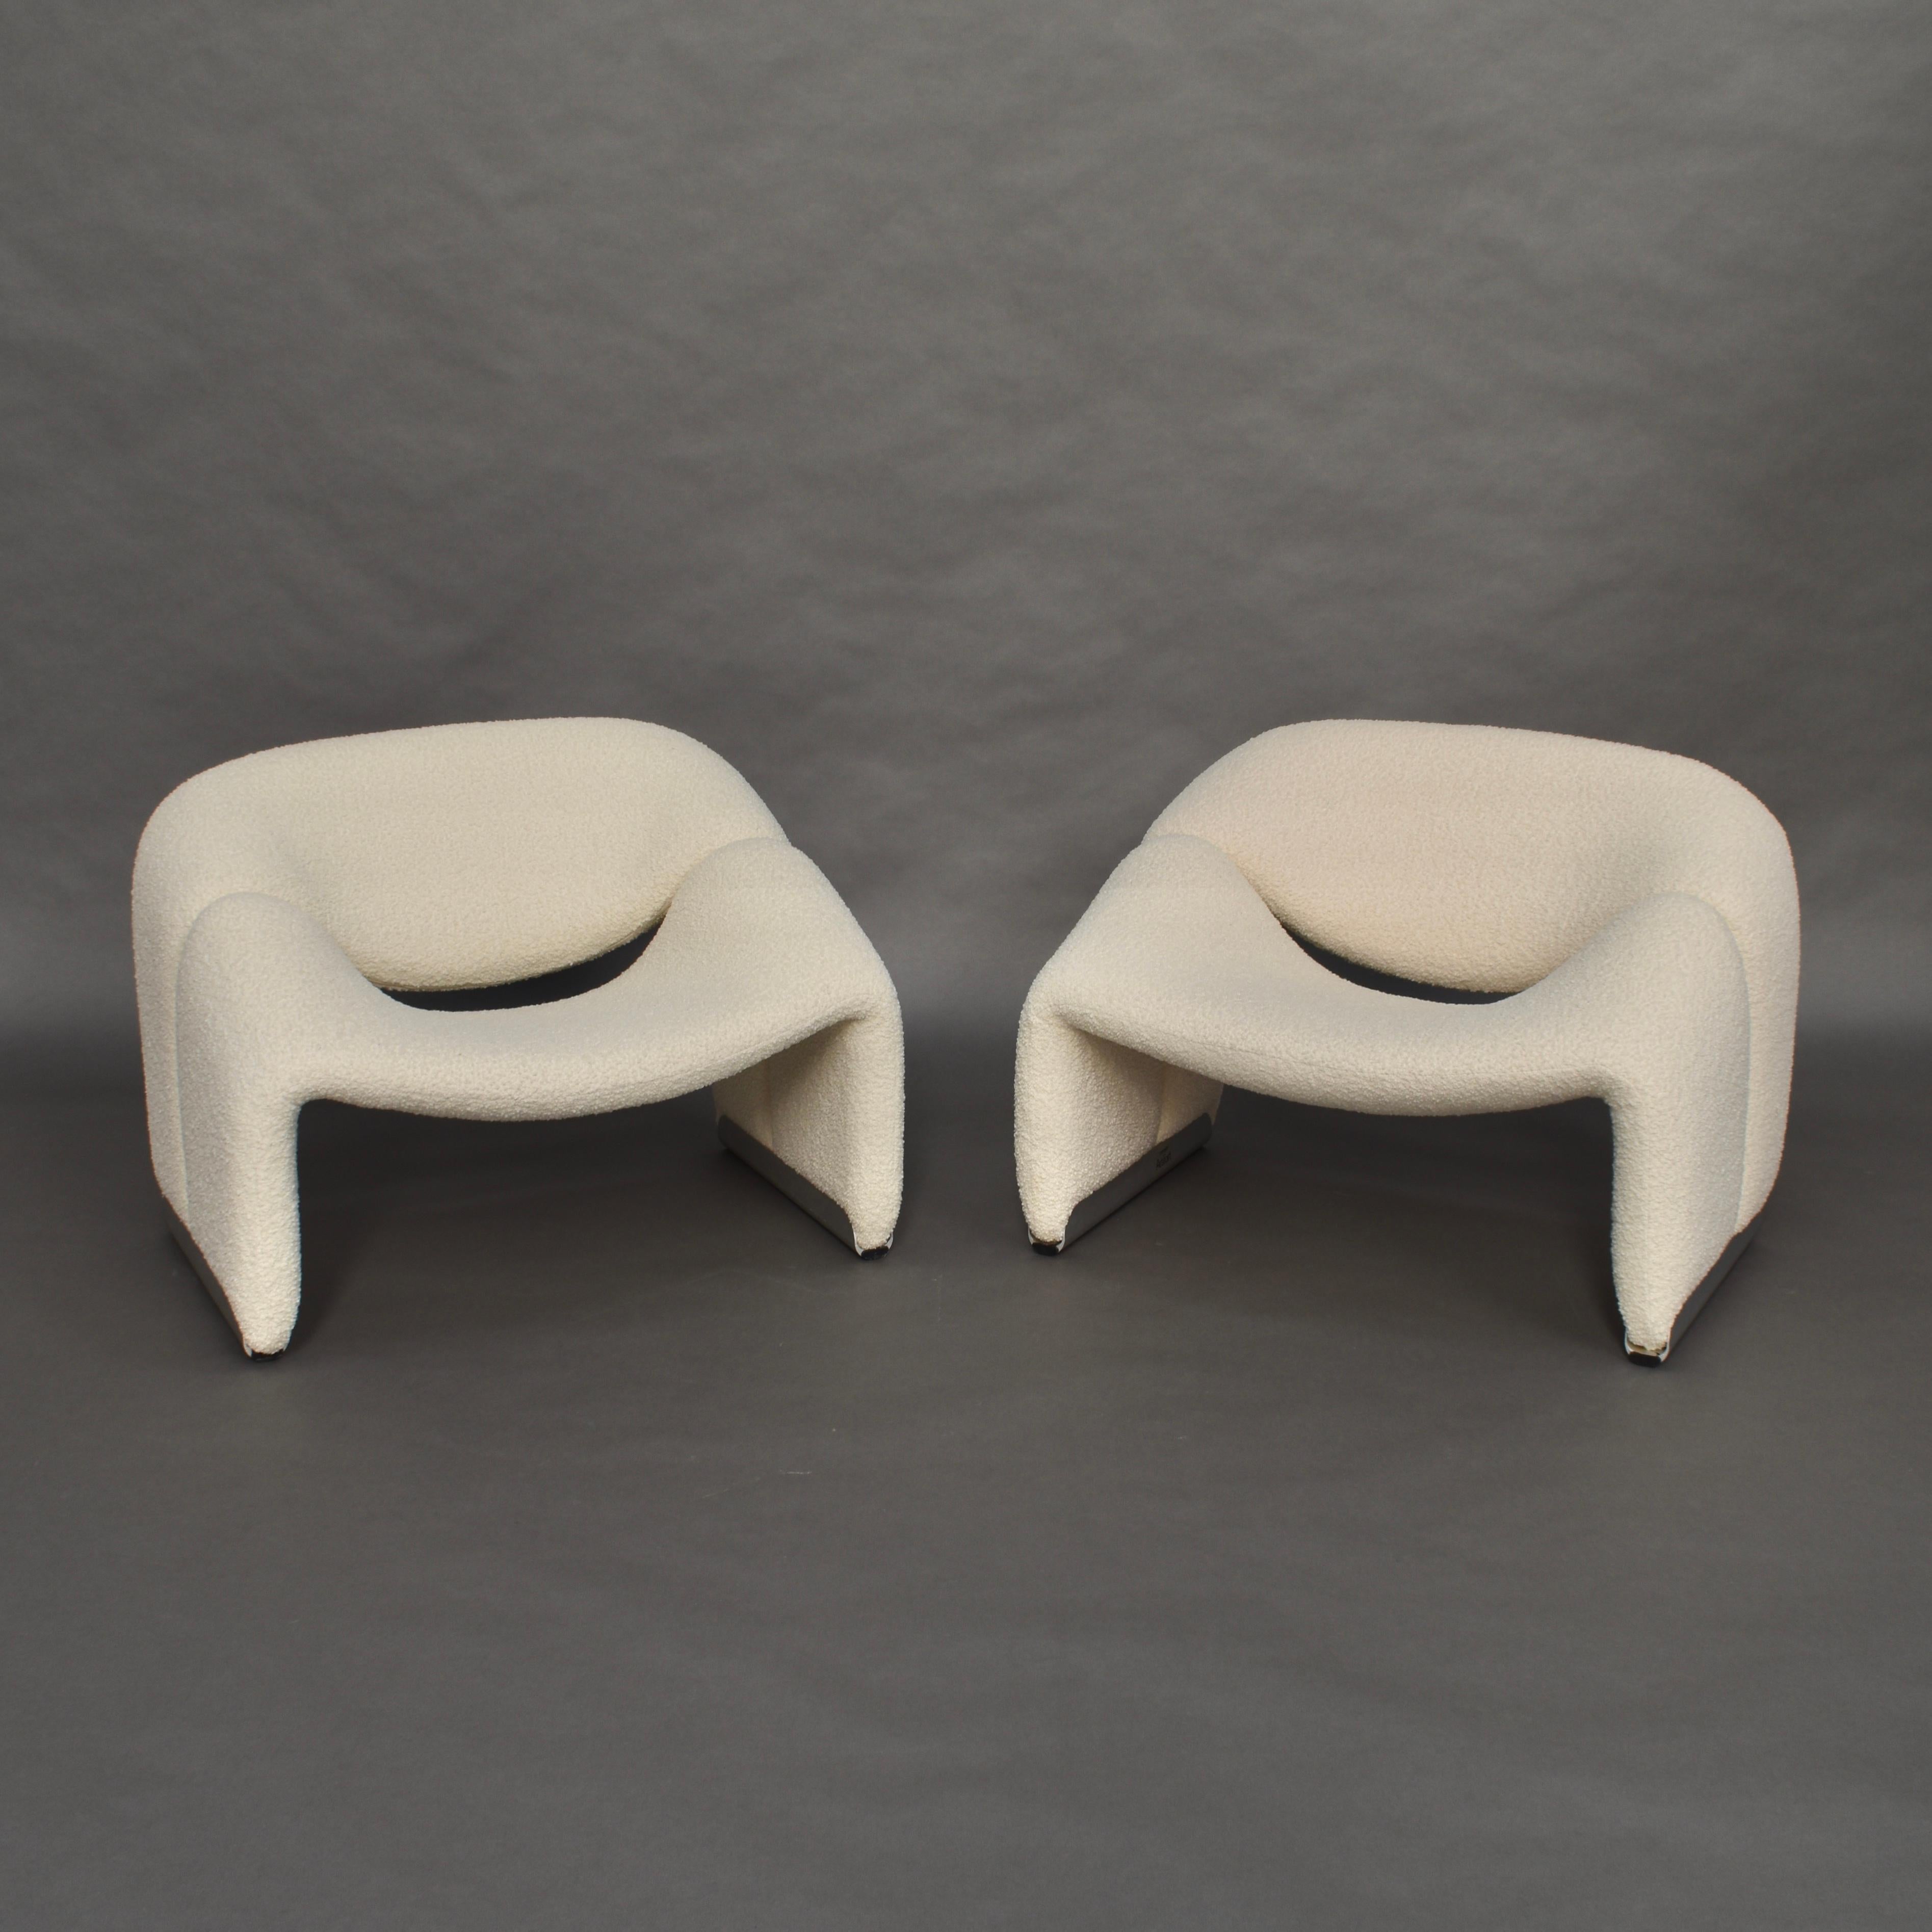 Dutch Pair of Pierre Paulin F598 Groovy Lounge Chairs for Artifort, Netherlands, 1972